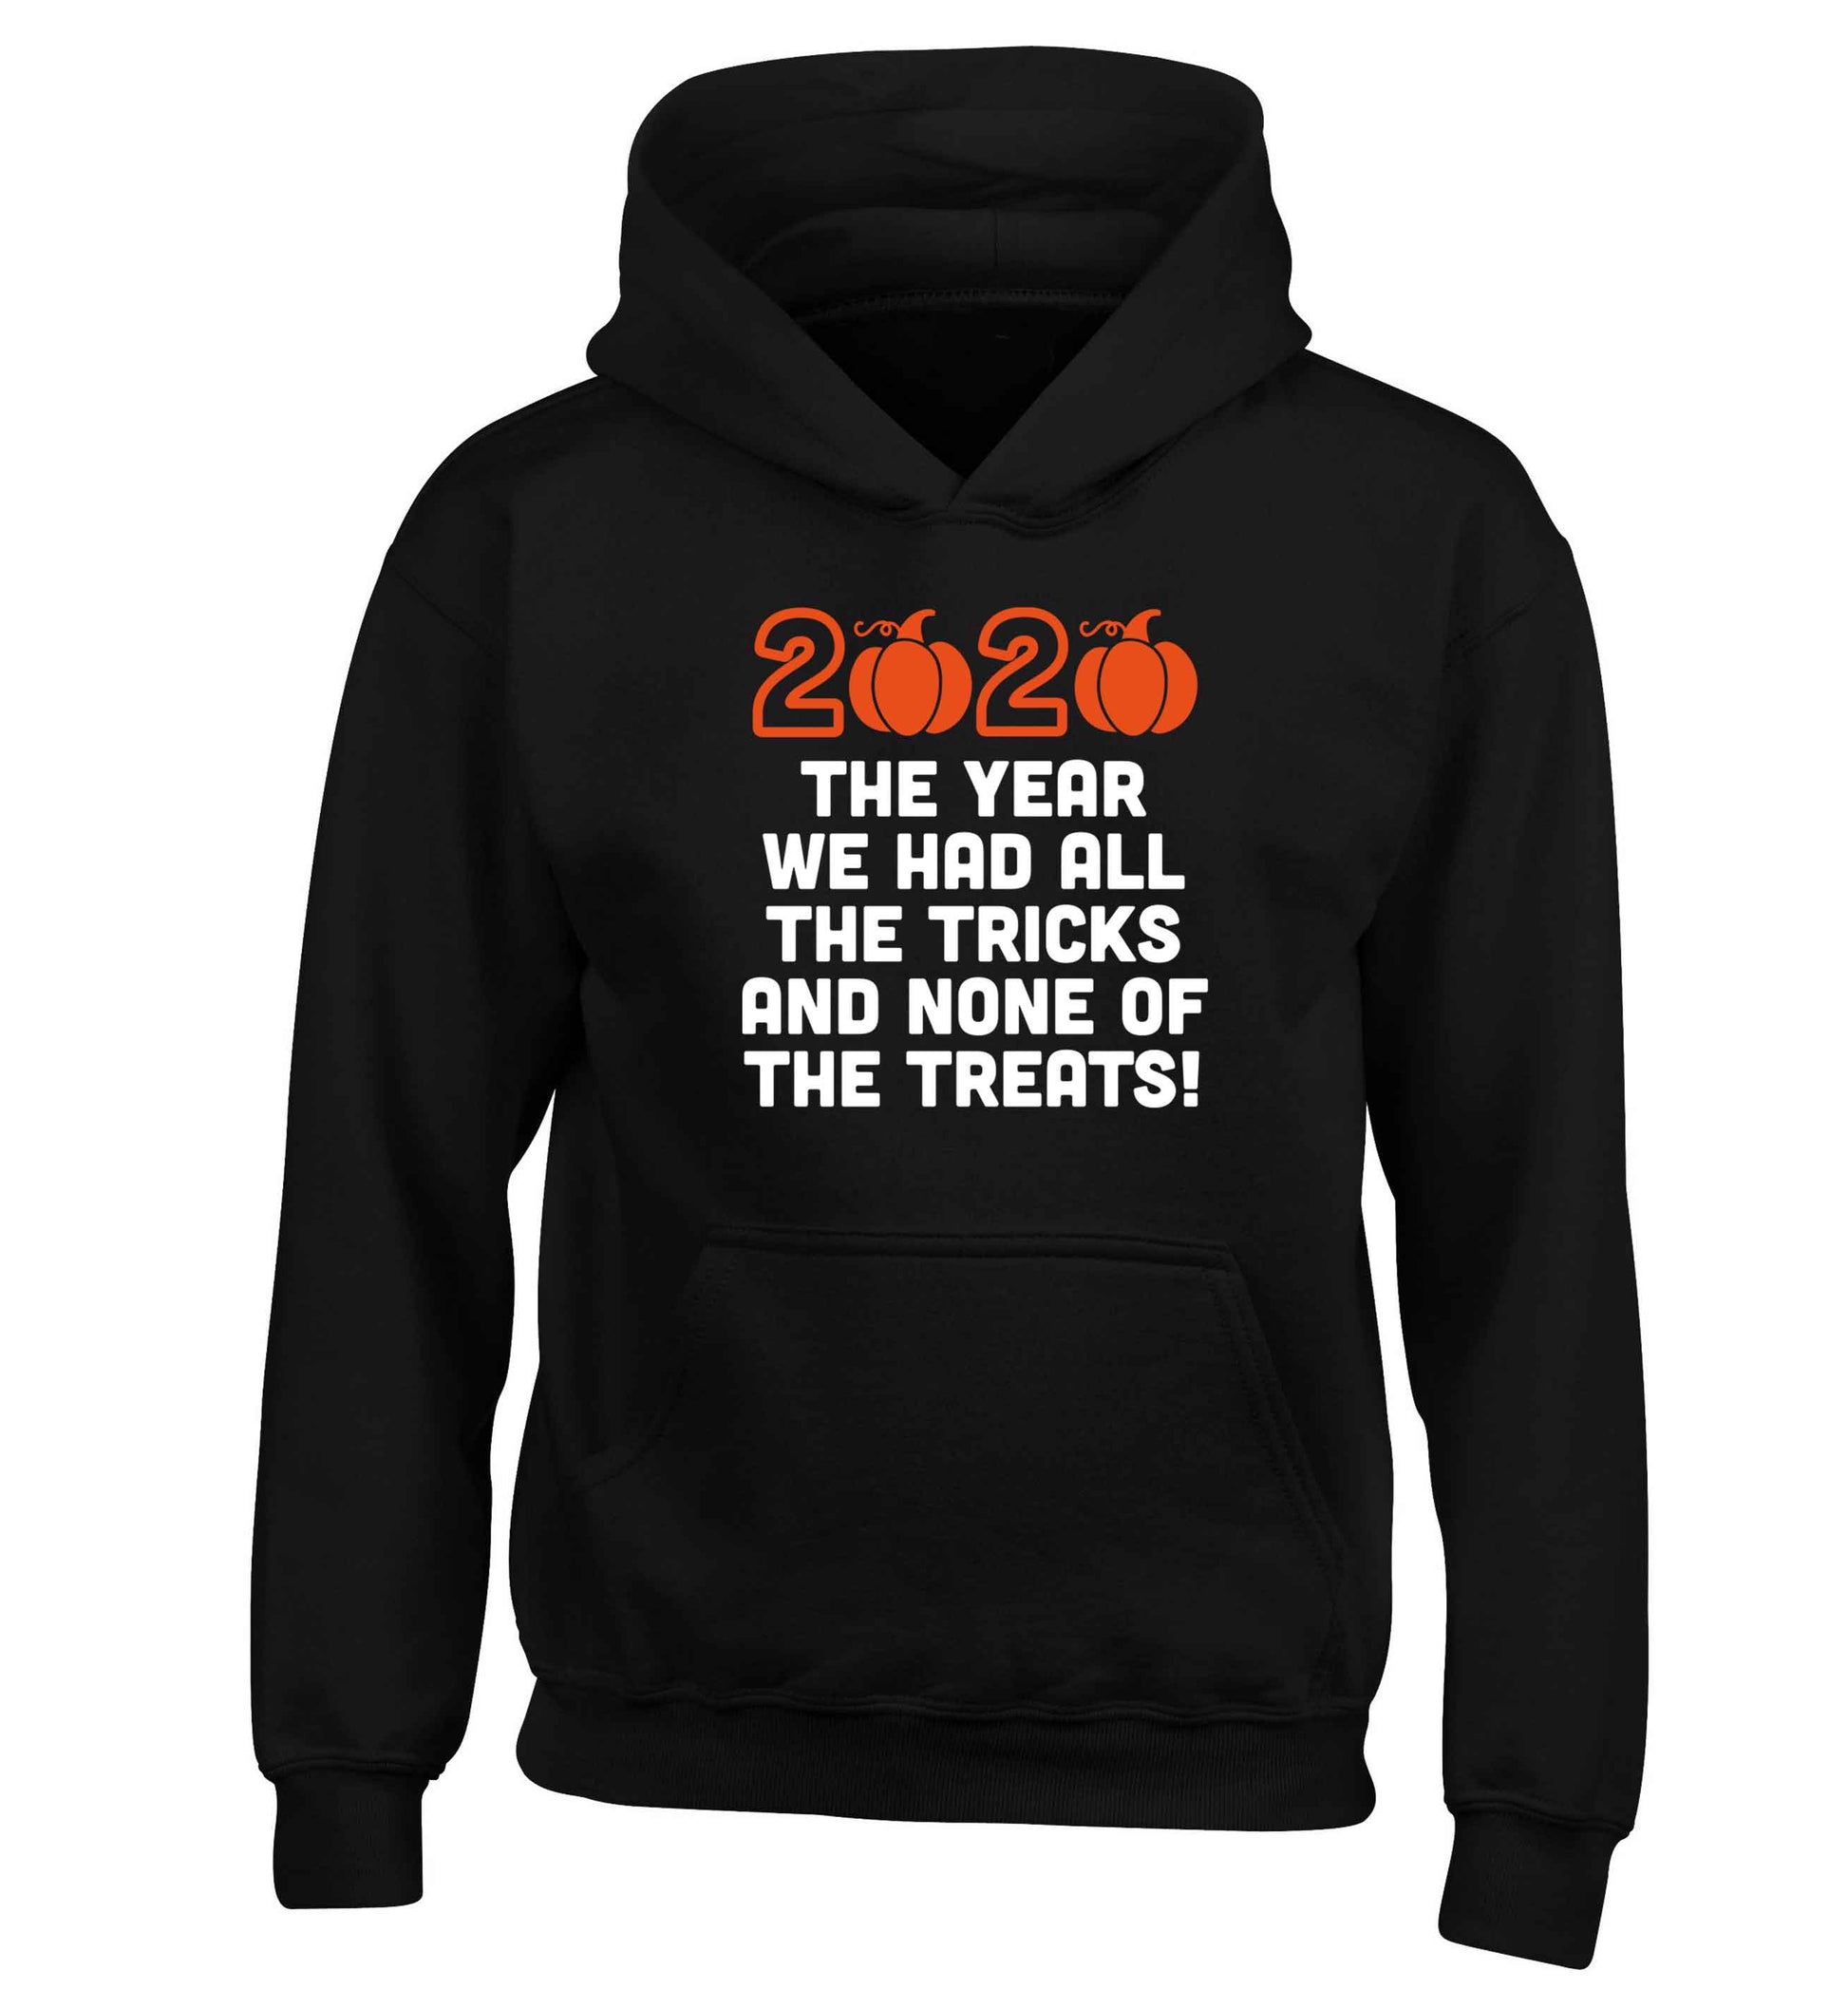 2020 The year we had all of the tricks and none of the treats children's black hoodie 12-13 Years